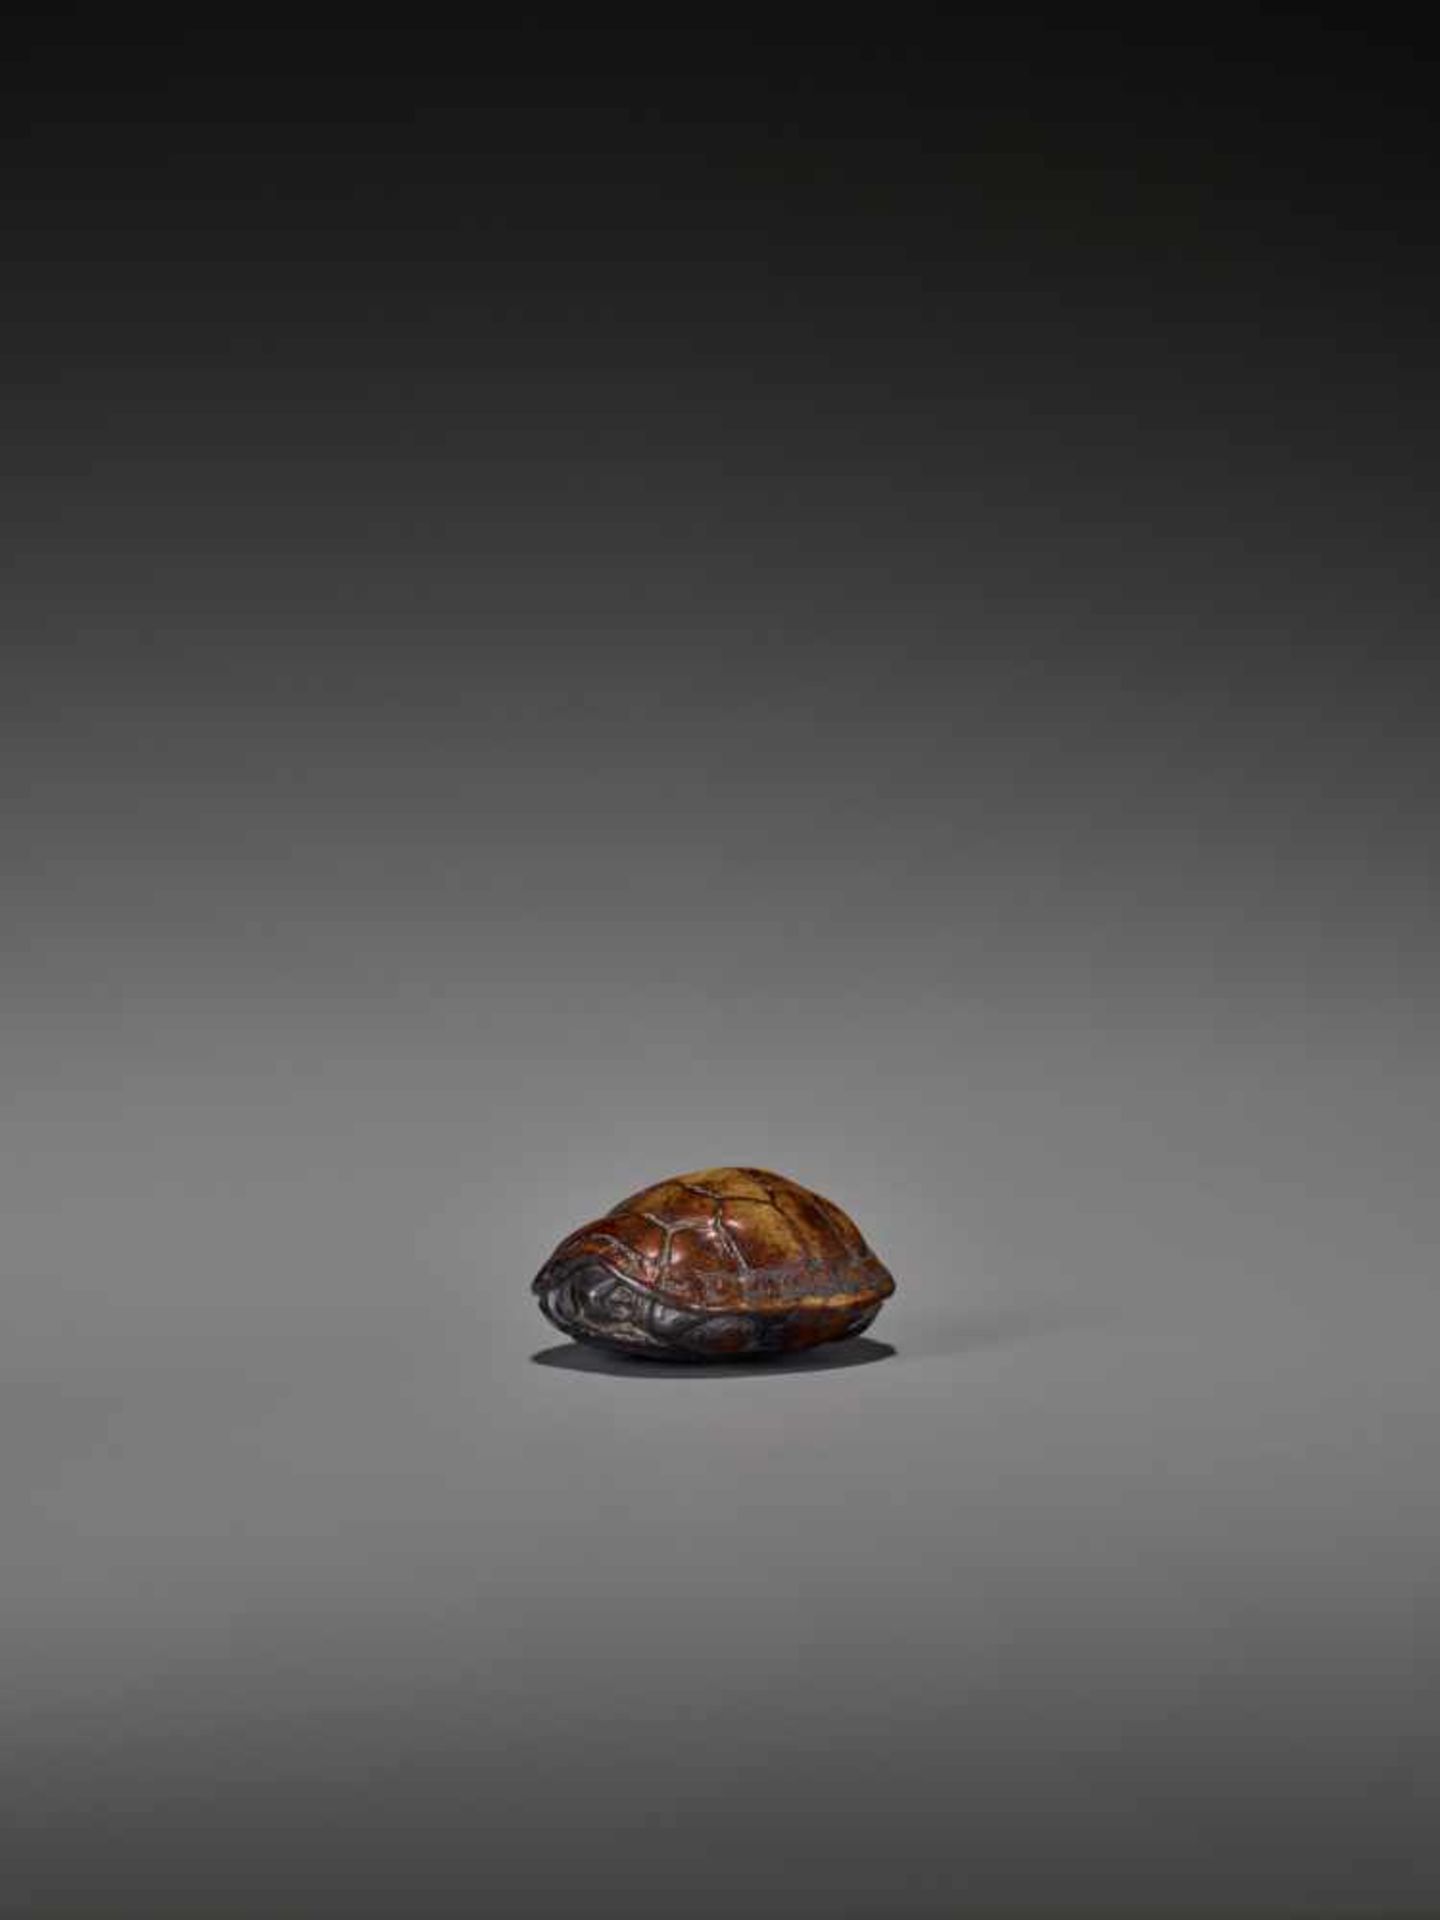 A WOOD NETSUKE OF A RETRACTED TORTOISE UnsignedJapan, 18th century, Edo period (1615-1868)This early - Image 3 of 10